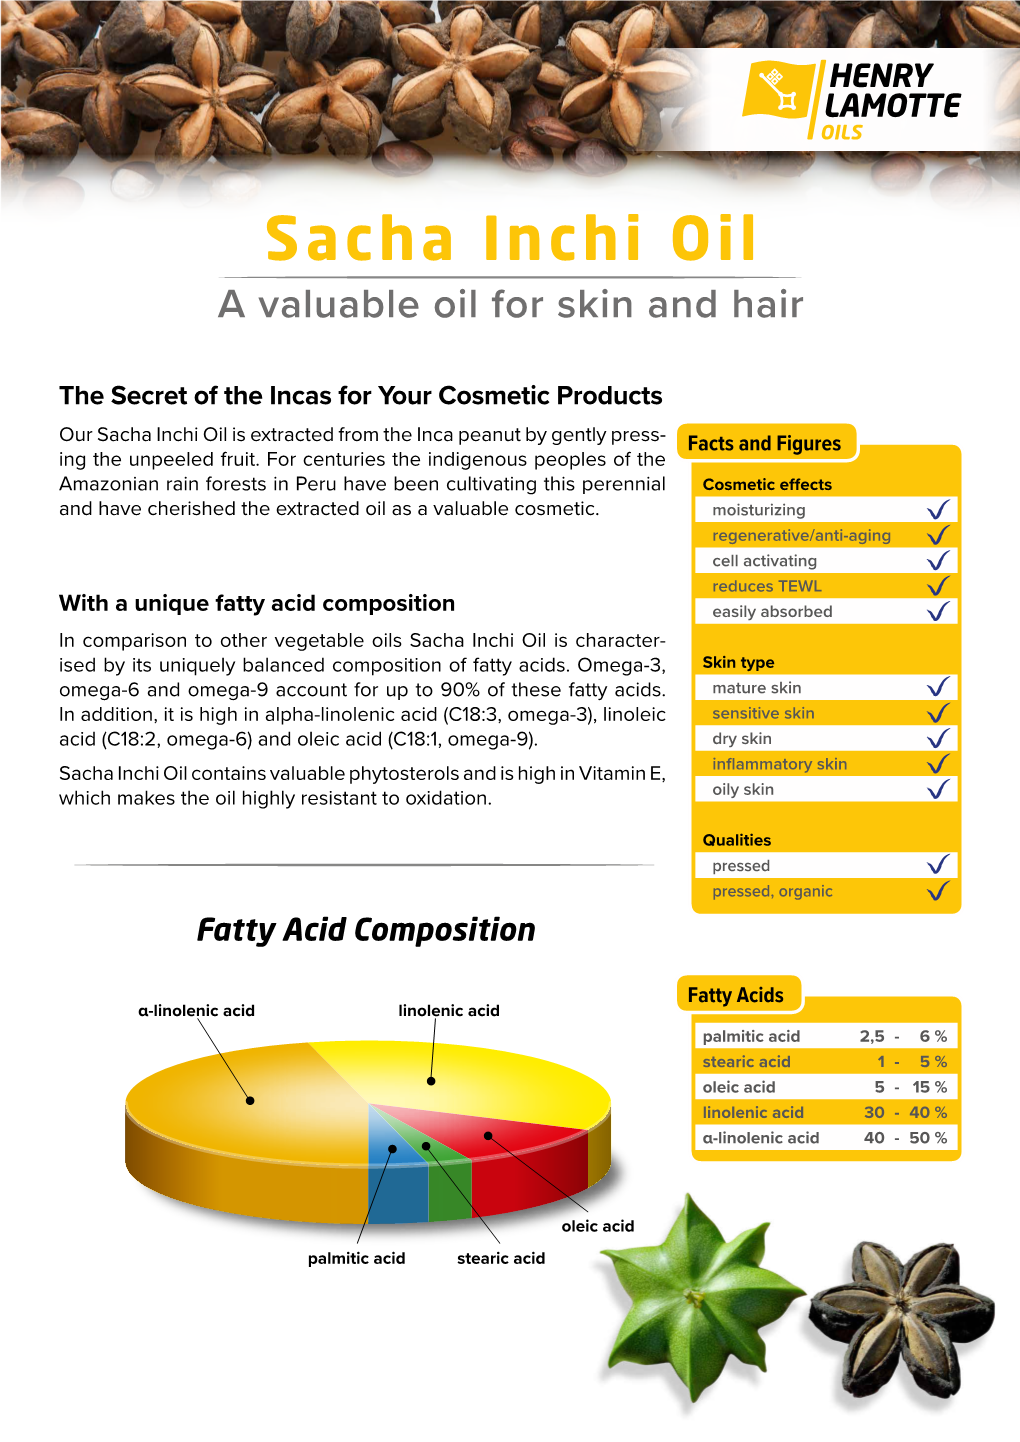 Sacha Inchi Oil a Valuable Oil for Skin and Hair